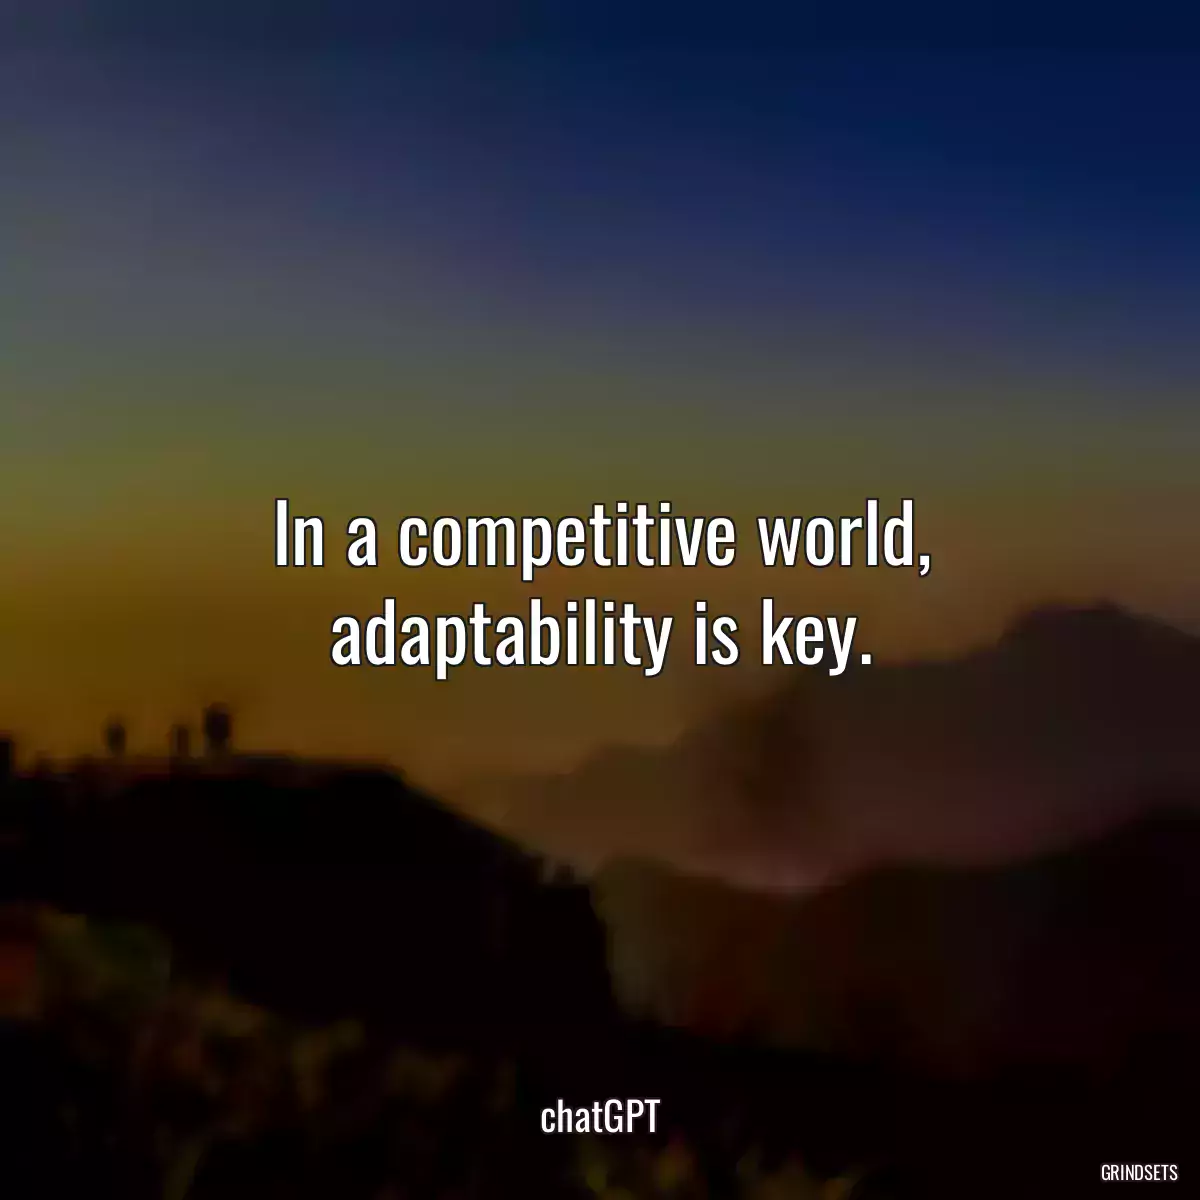 In a competitive world, adaptability is key.